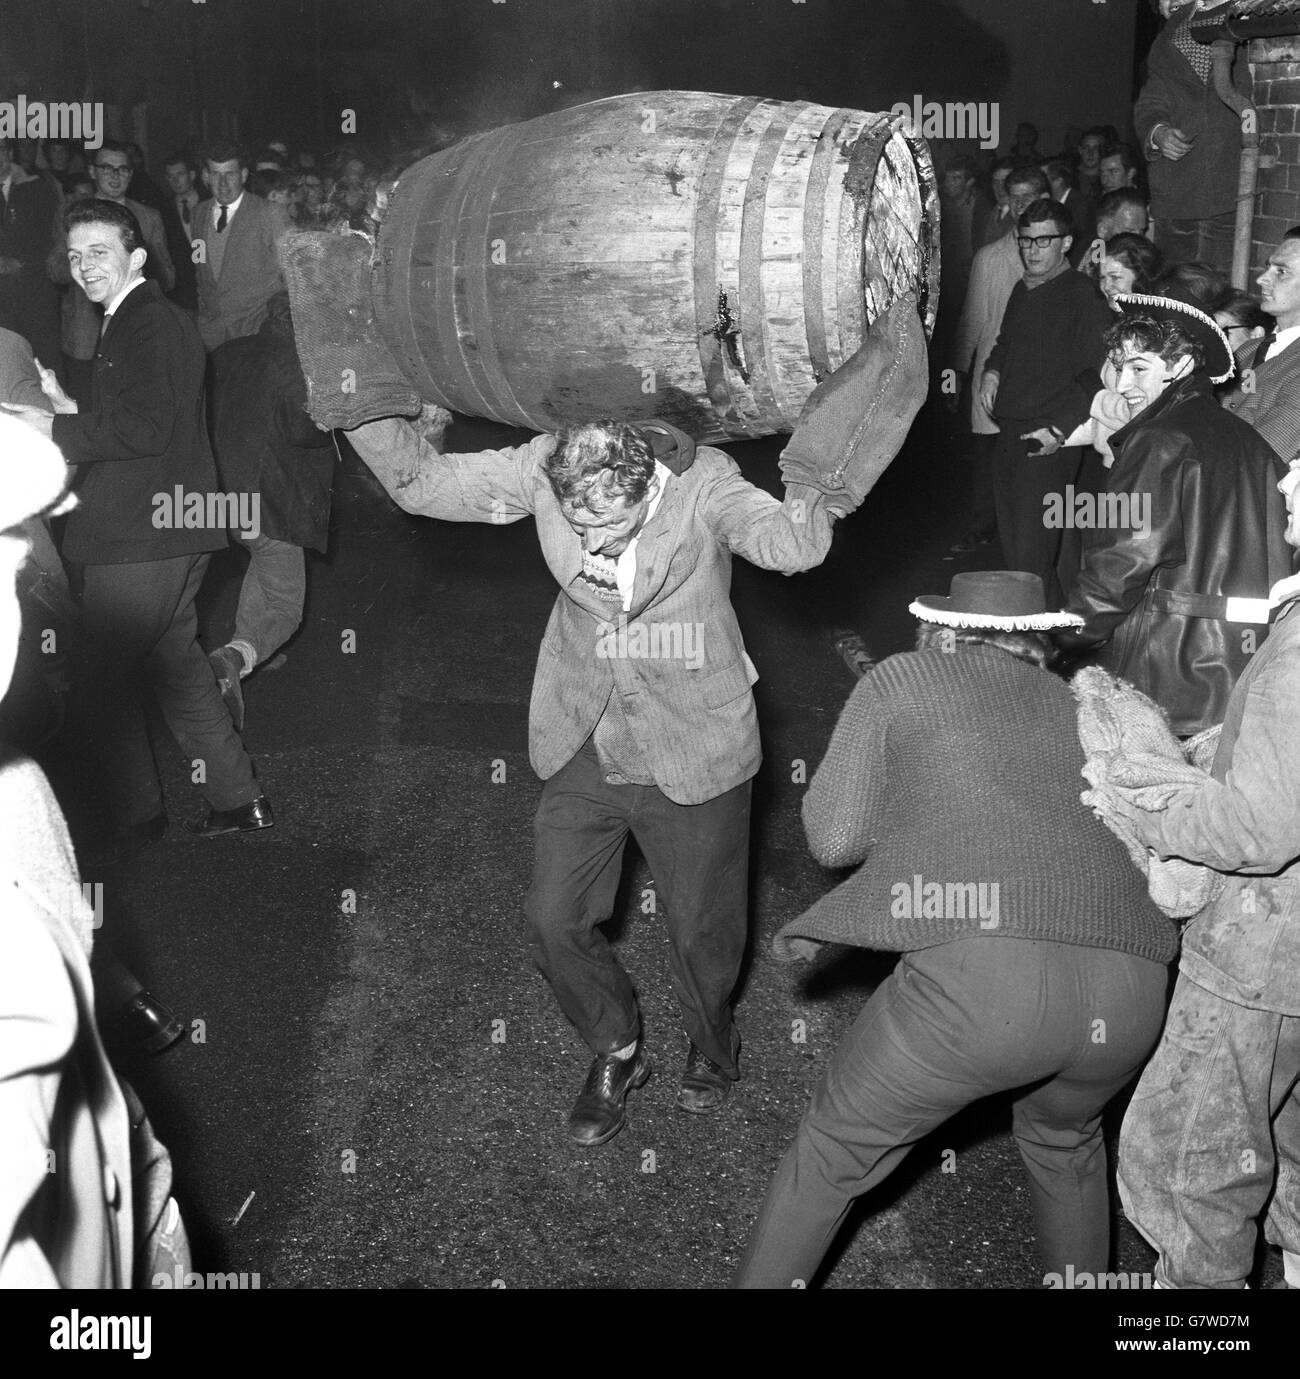 Tar Barrel Burning Ceremony - Ottery St Mary's. Crowds scatter as a participant dashes away with his burning barrel. Stock Photo